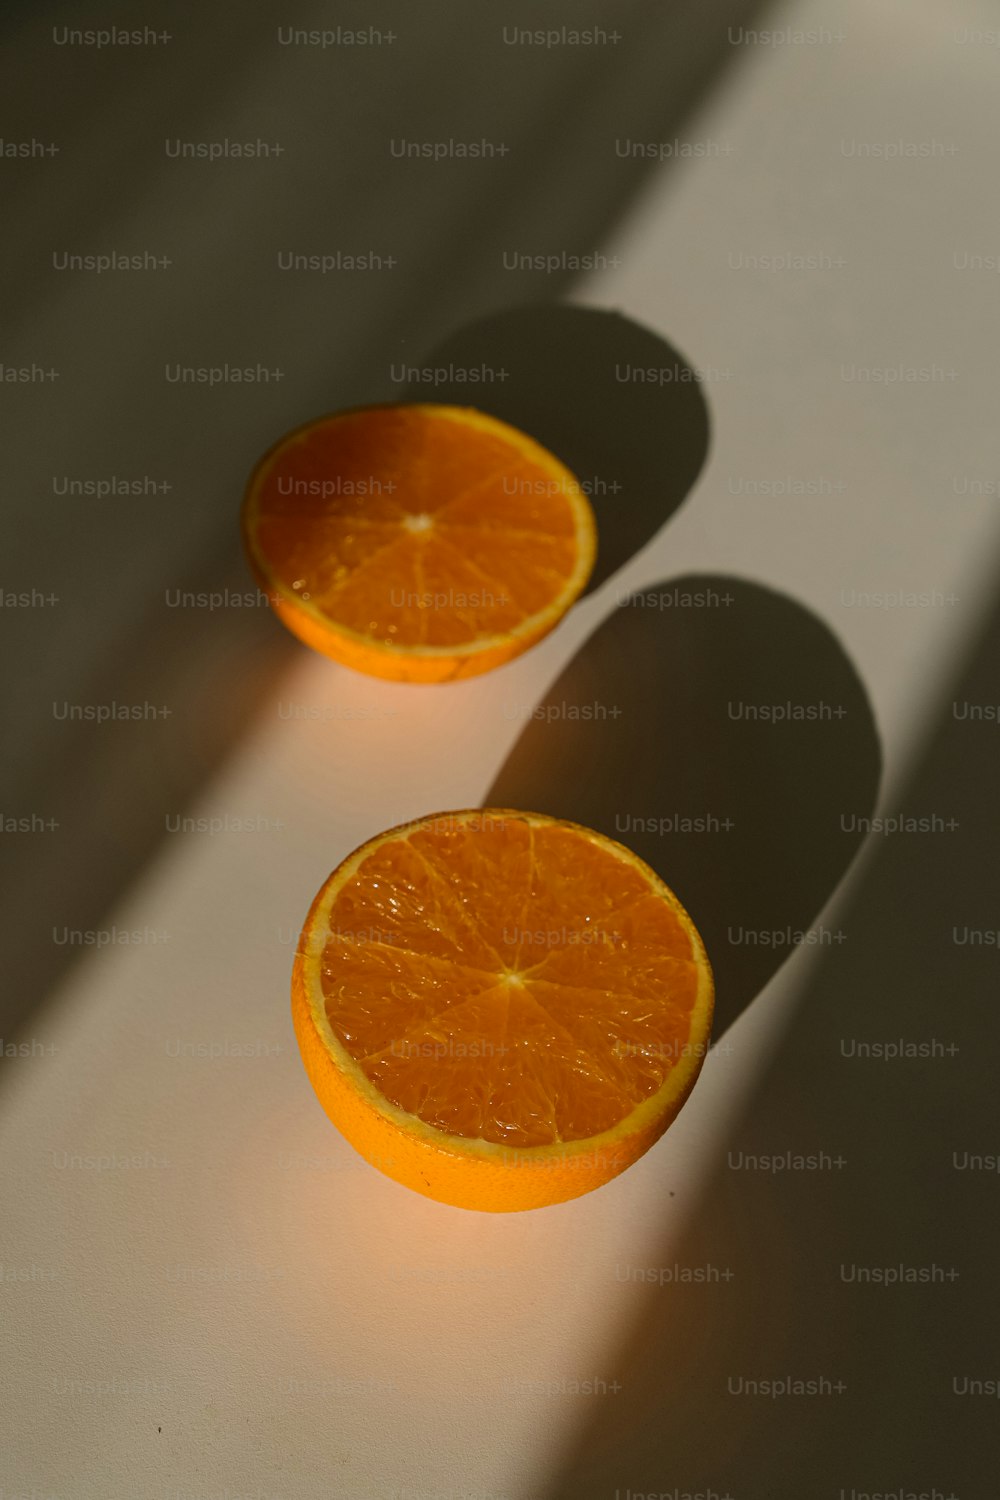 two halves of an orange sitting on a table